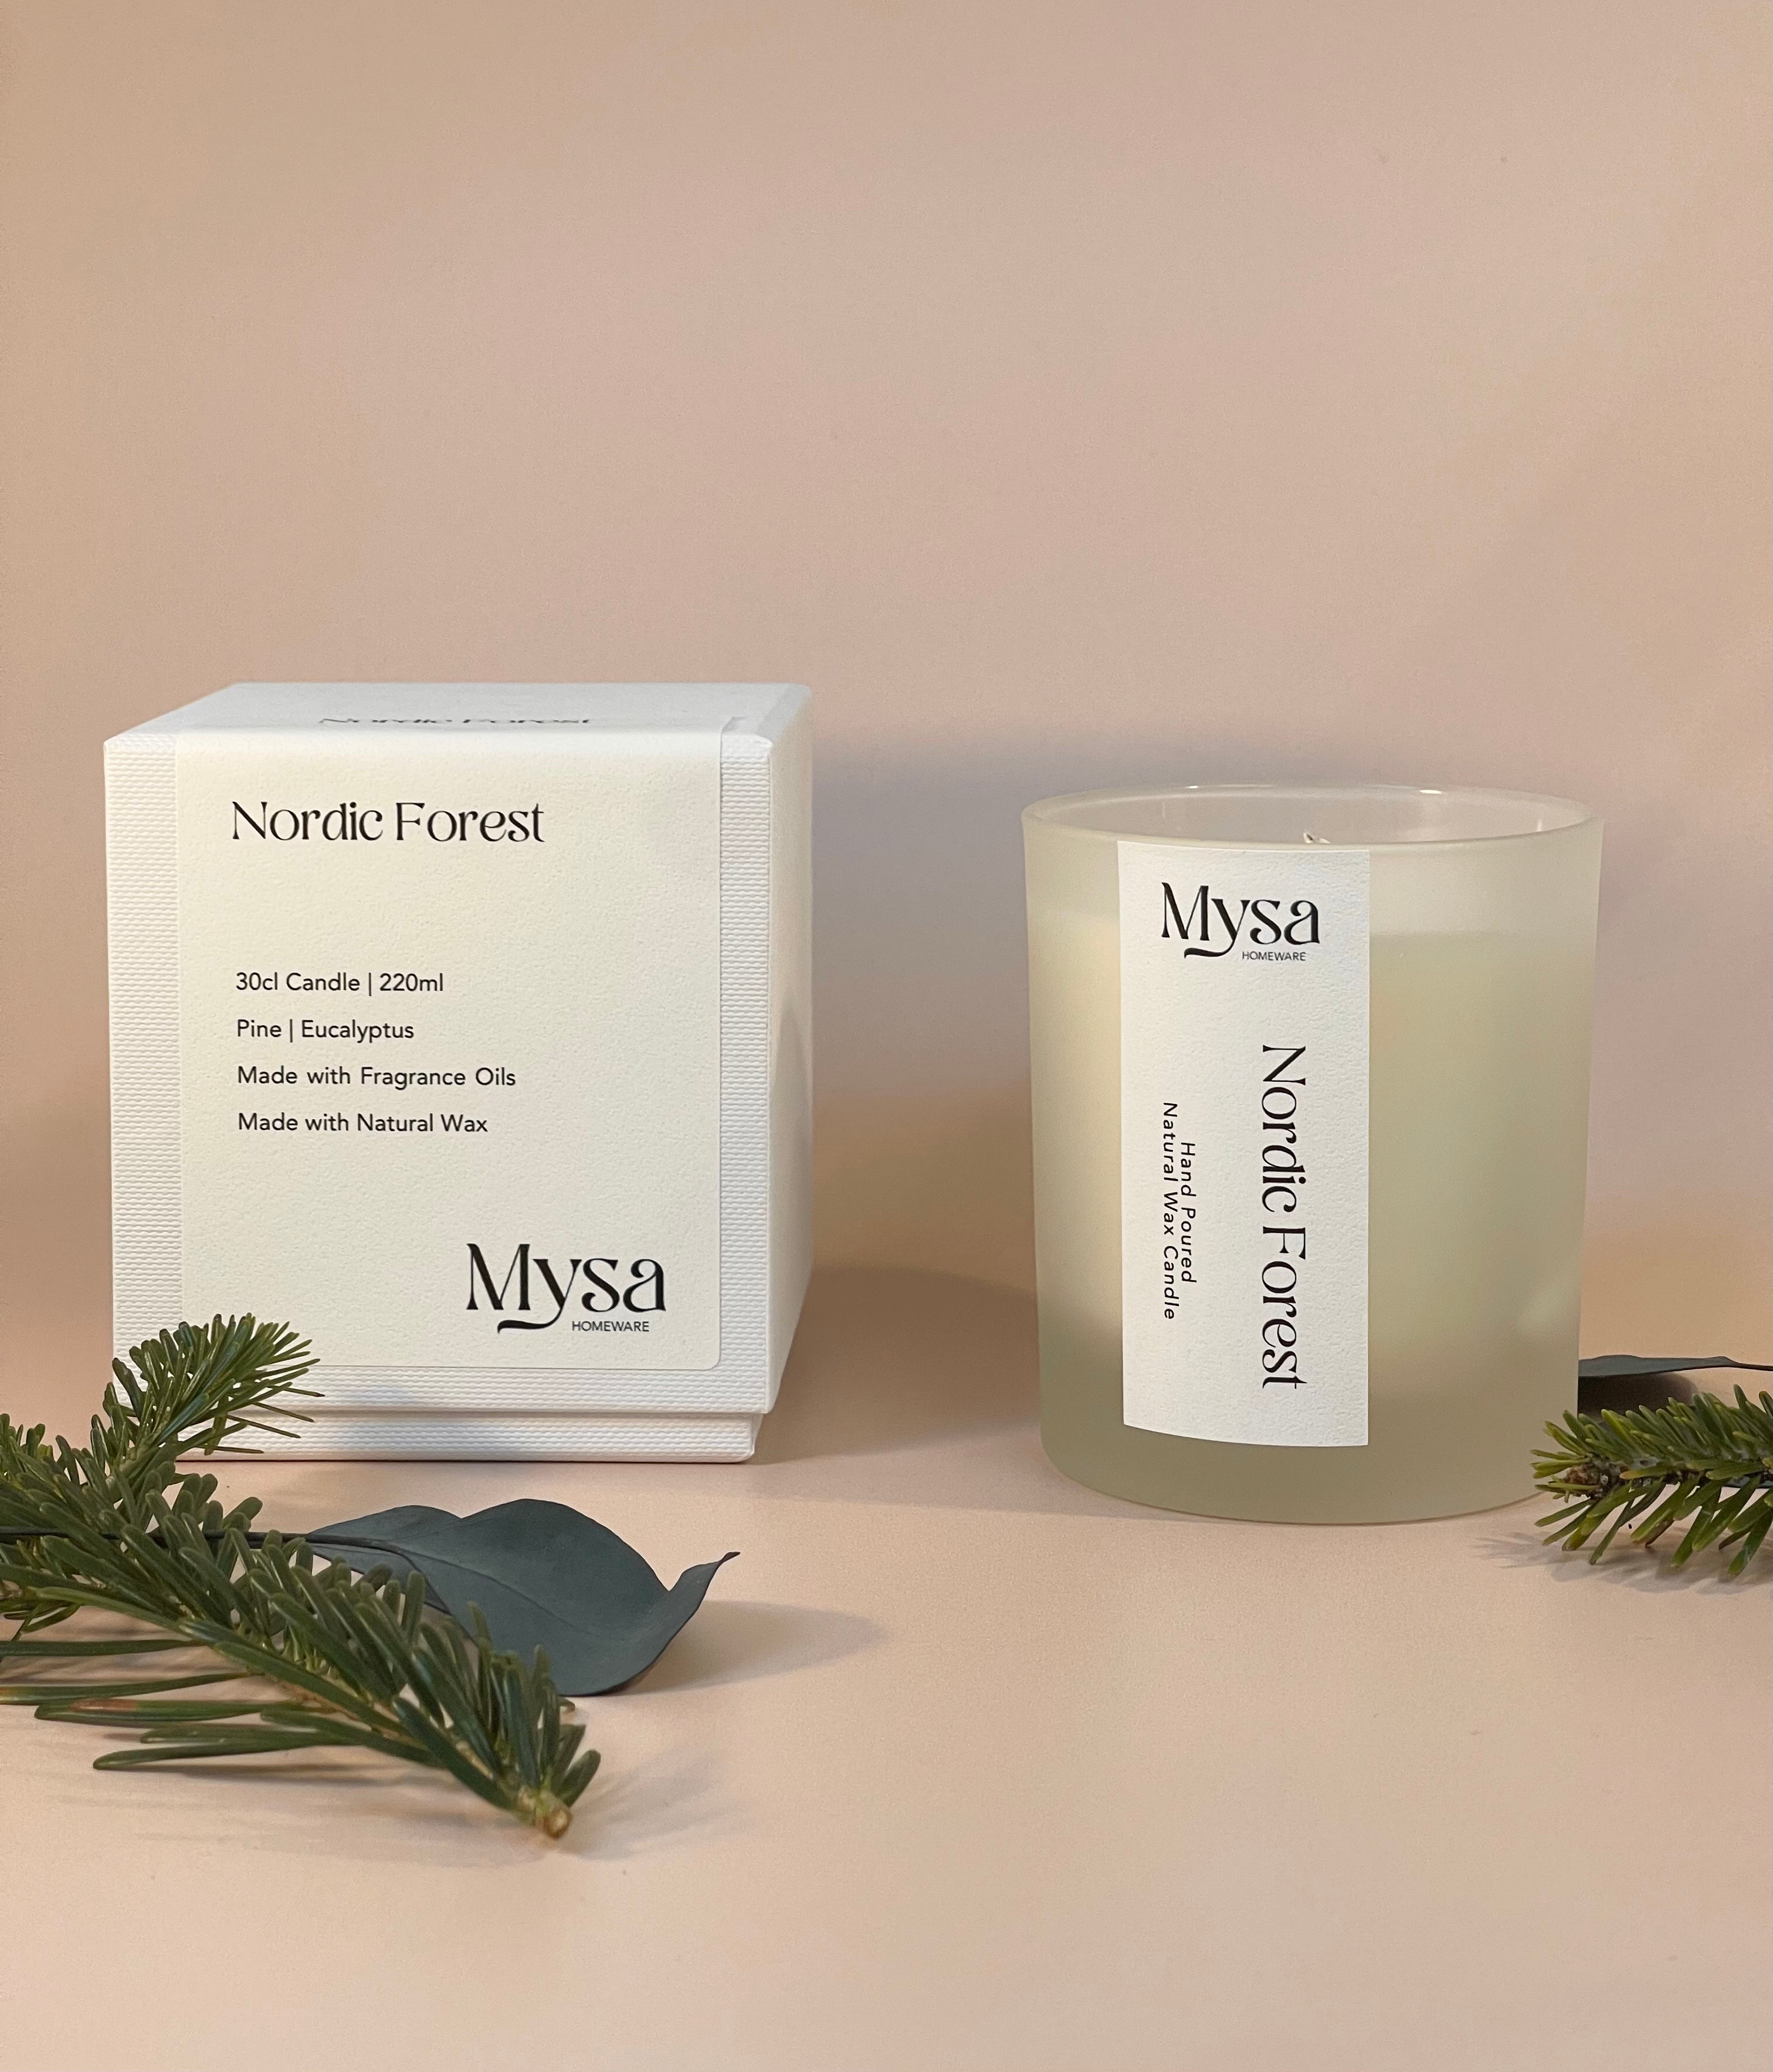 Nordic Forest luxury scented candle crafted from natural wax, featuring a delightful blend of pine and eucalyptus fragrance.